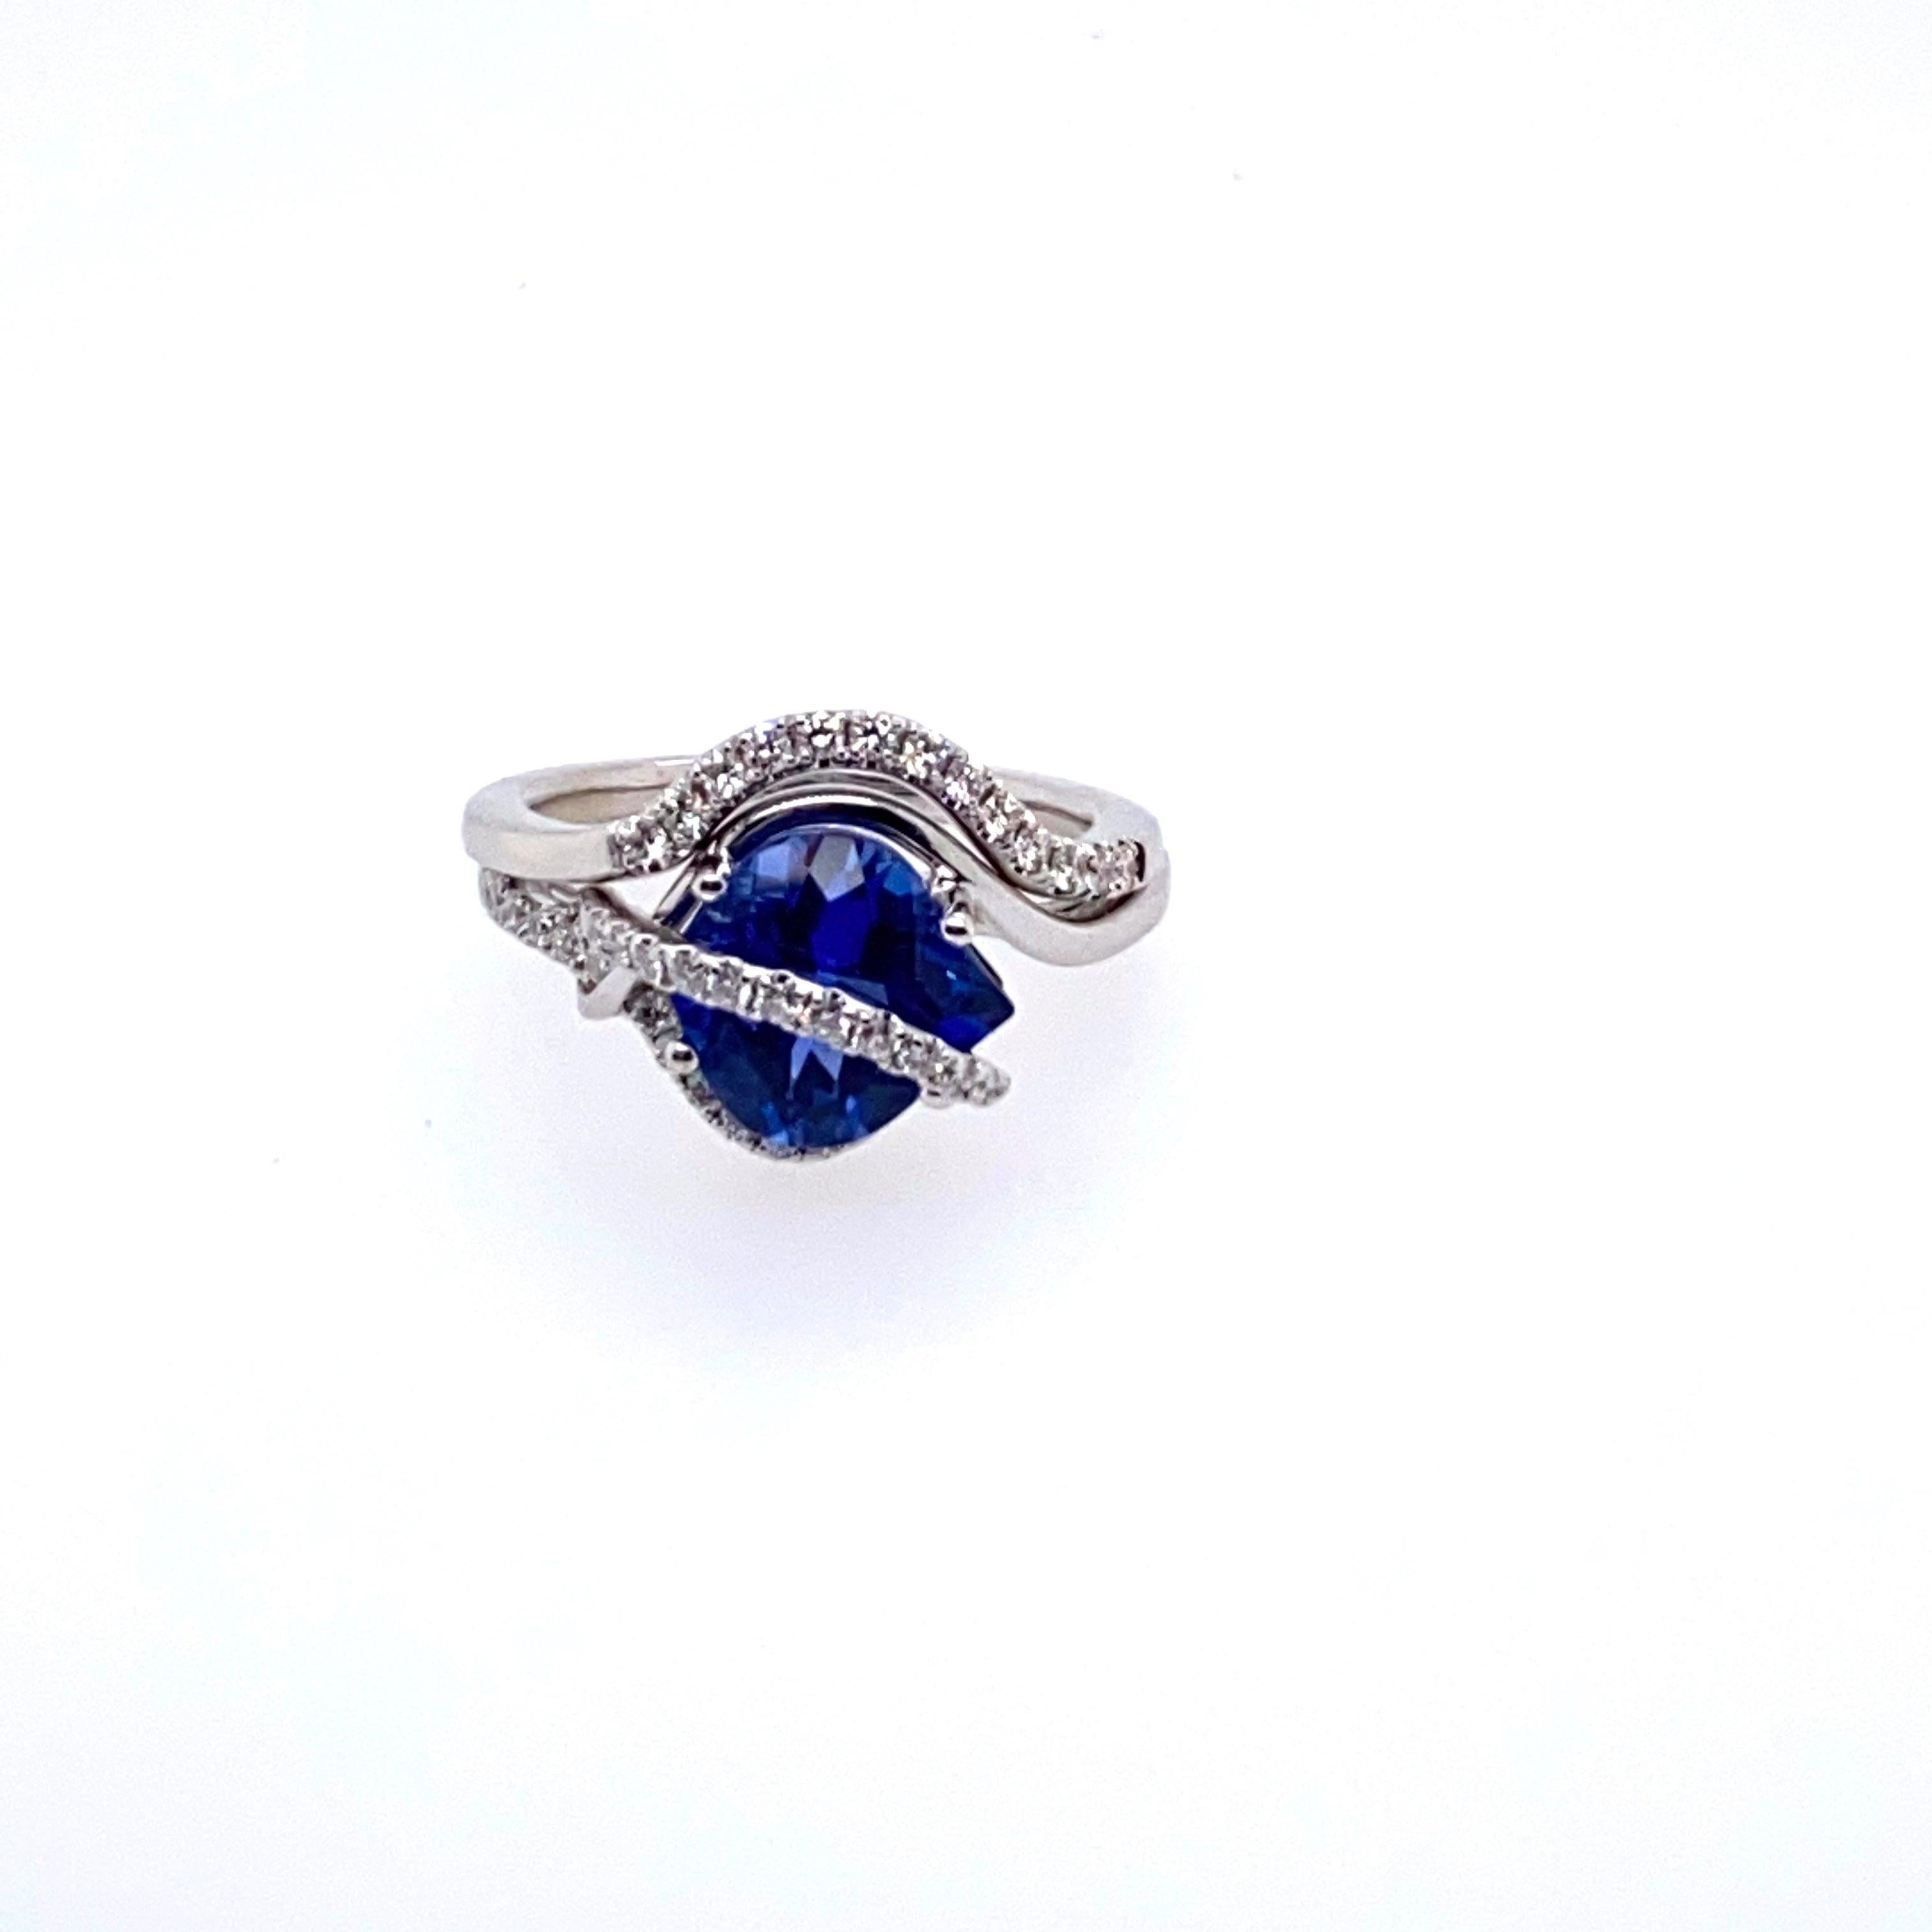 One 14 karat white gold 3.06 carat onion shaped Chatham sapphire set in a modern mounting, prong set with twenty-seven round brilliant diamonds, 0.21 carat total weight with matching H/I color and SI1/SI2 clarity.  The shank measures 1.3mm near the